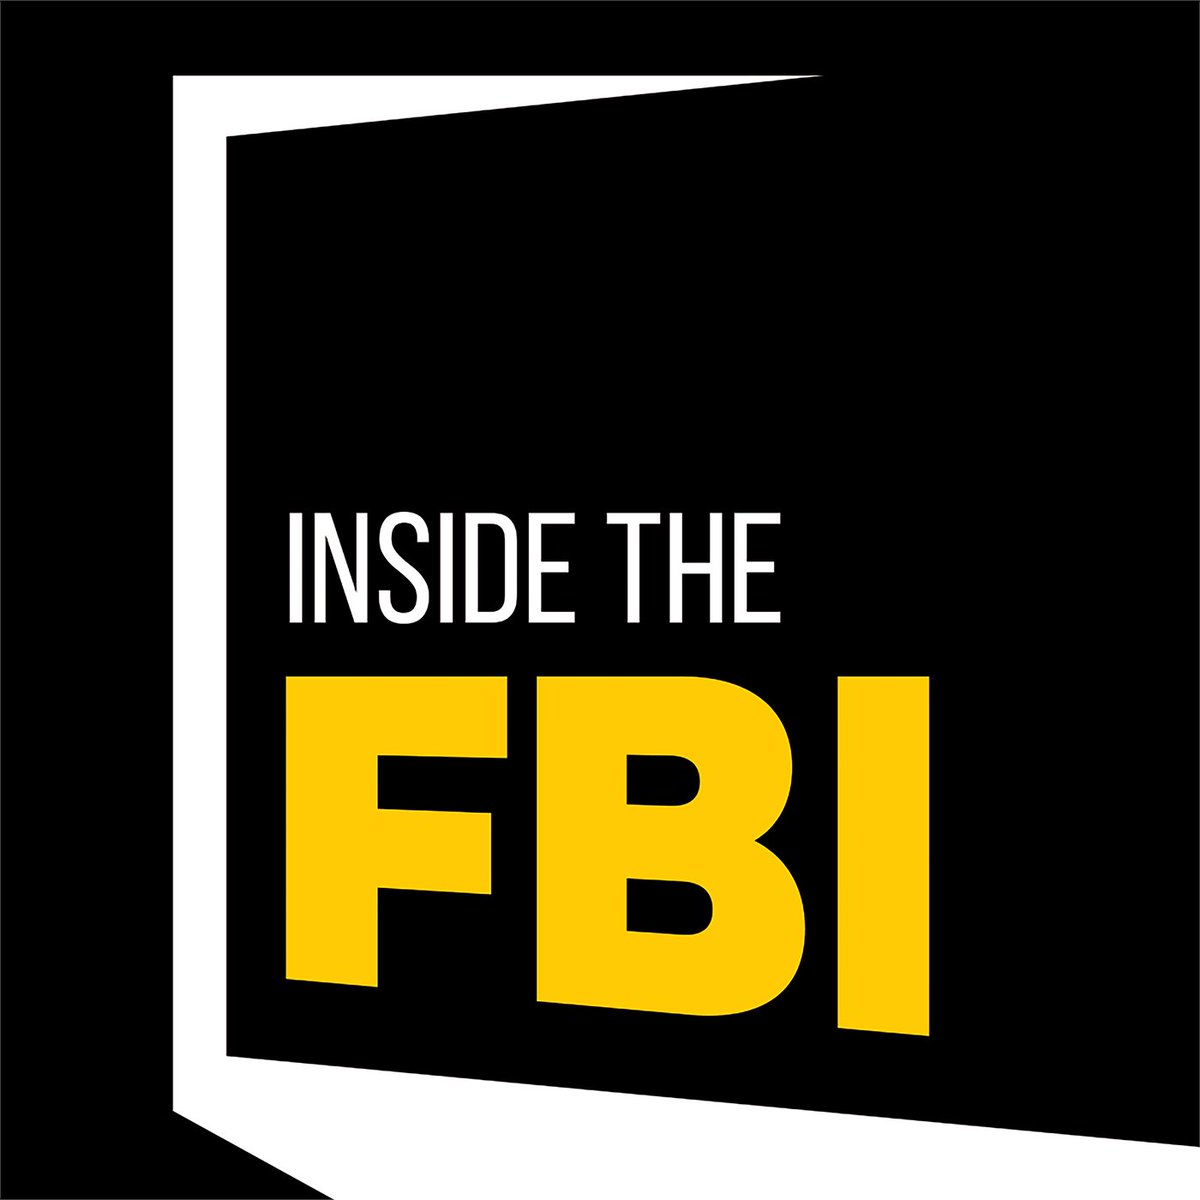 On this episode of Inside the #FBI, we’ll learn how charity fraud scams work, how to avoid being conned, and how to report suspected incidents to the Bureau. ow.ly/BnMo50QfcgQ